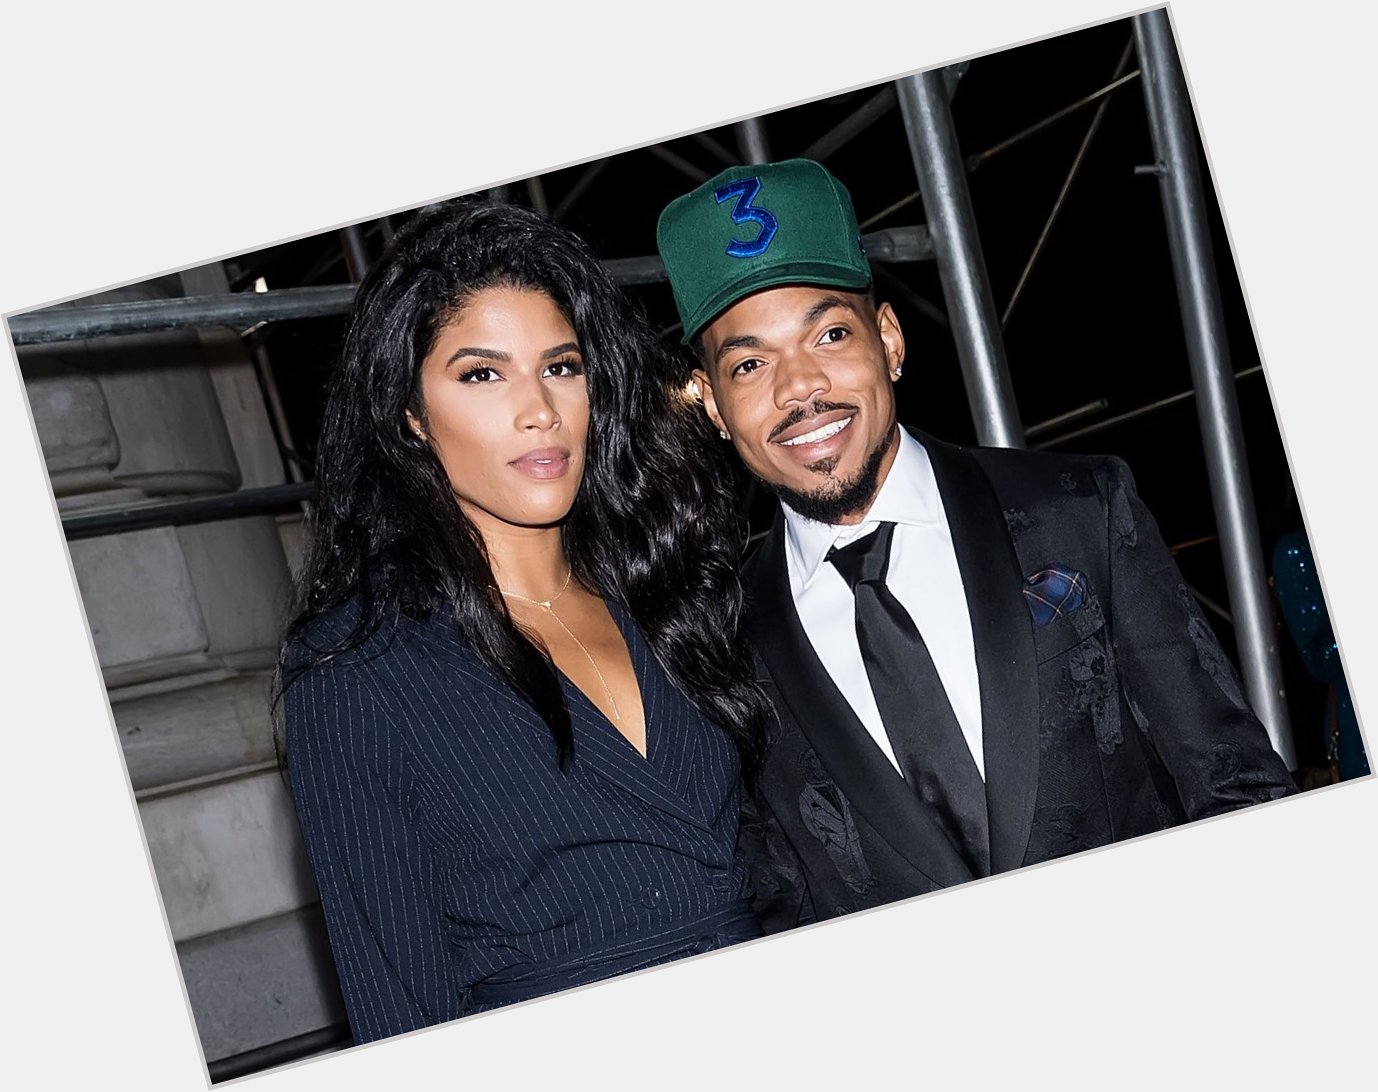 Chance the Rapper gets heartfelt birthday message from wife Kirsten Corley  